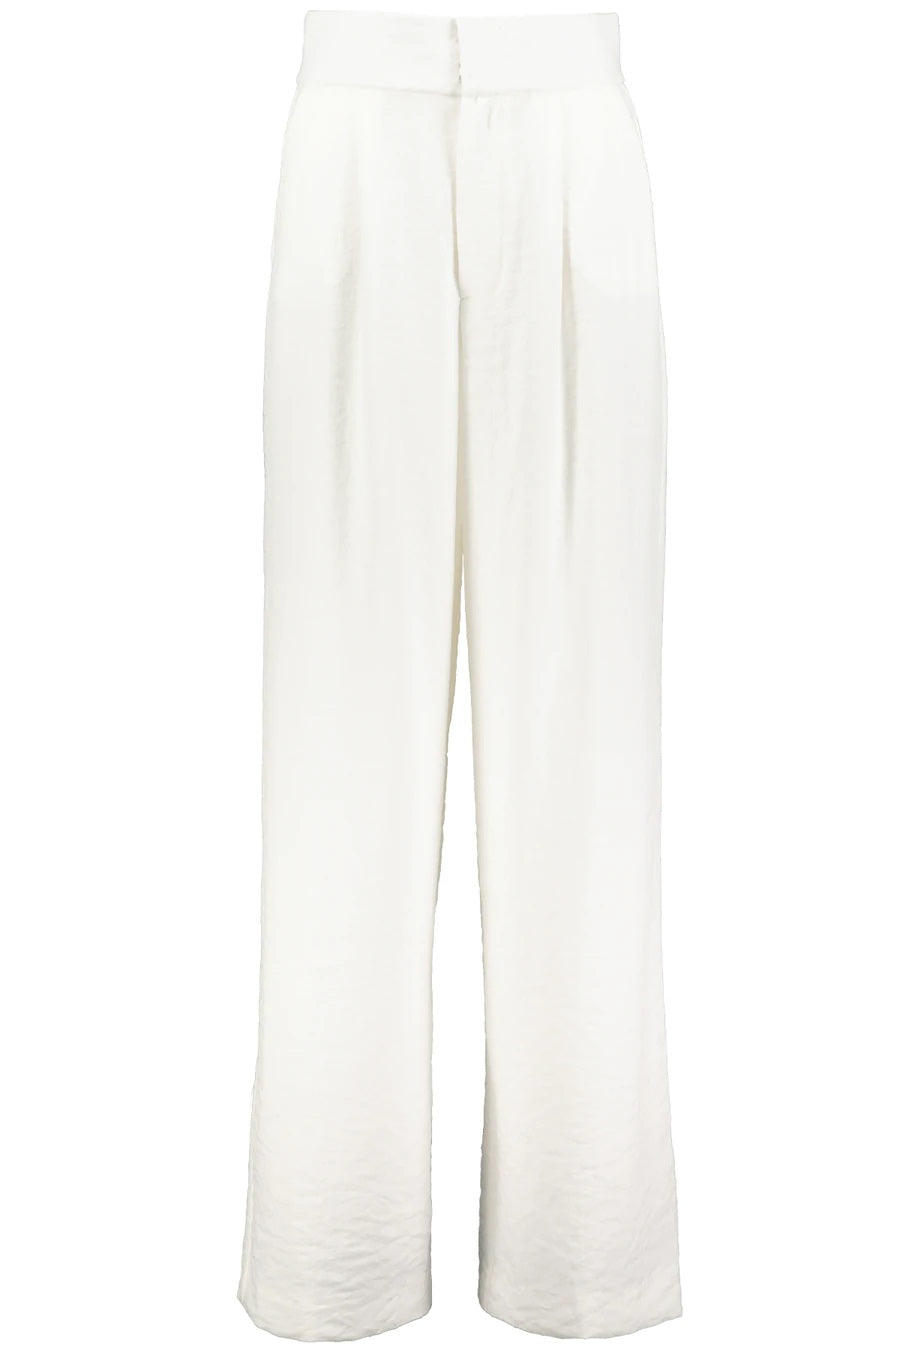 Bishop + Young, Sorrento Wide Leg Pant in White - Boutique Dandelion